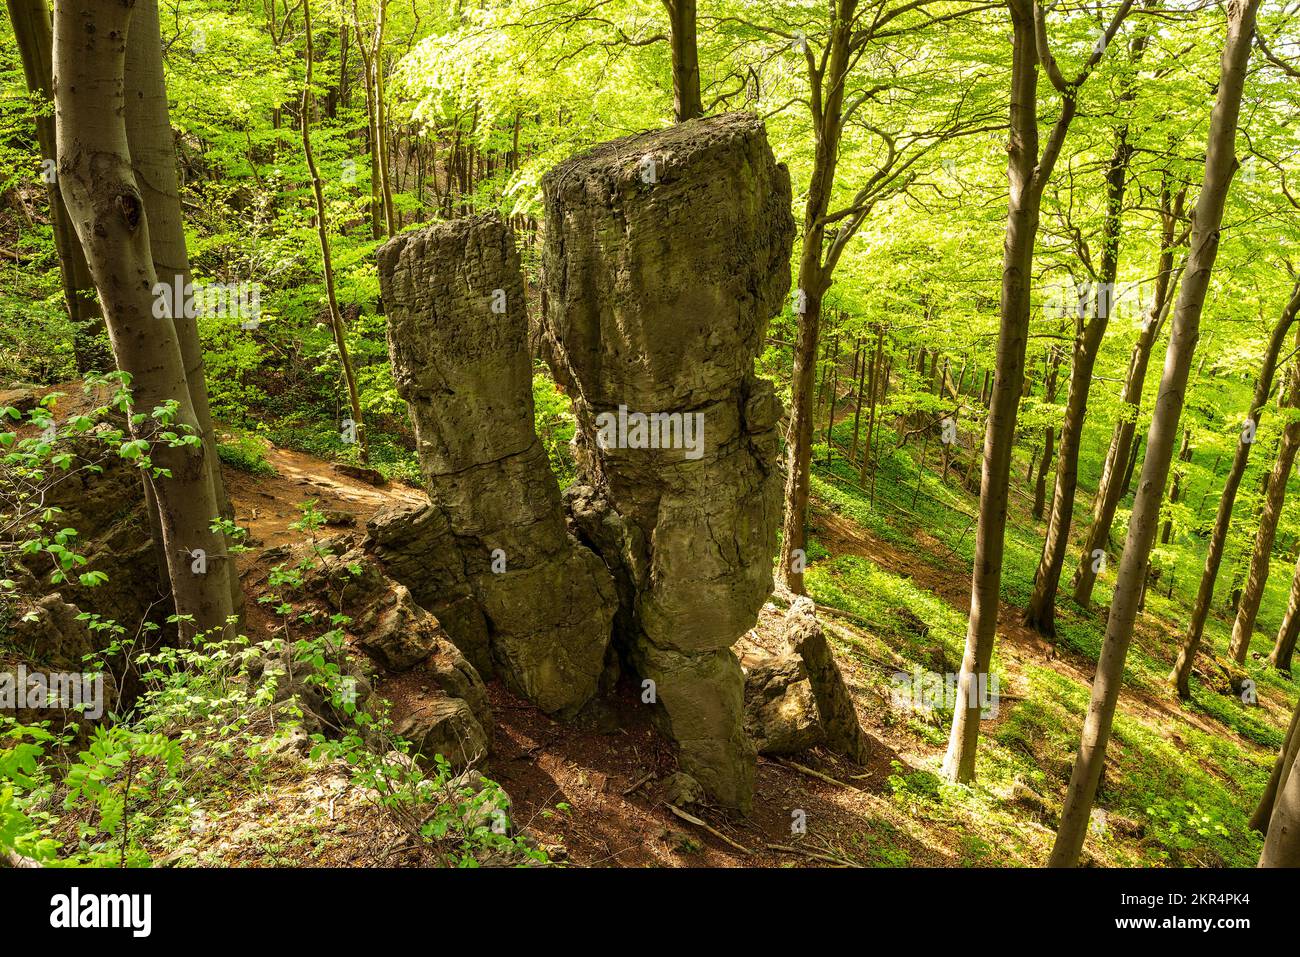 Elevated view of the distinctive limestone rock formation 'Adam & Eva' at the 'Ith-Hils-Weg' hiking trail, Ith, Weserbergland, Germany Stock Photo